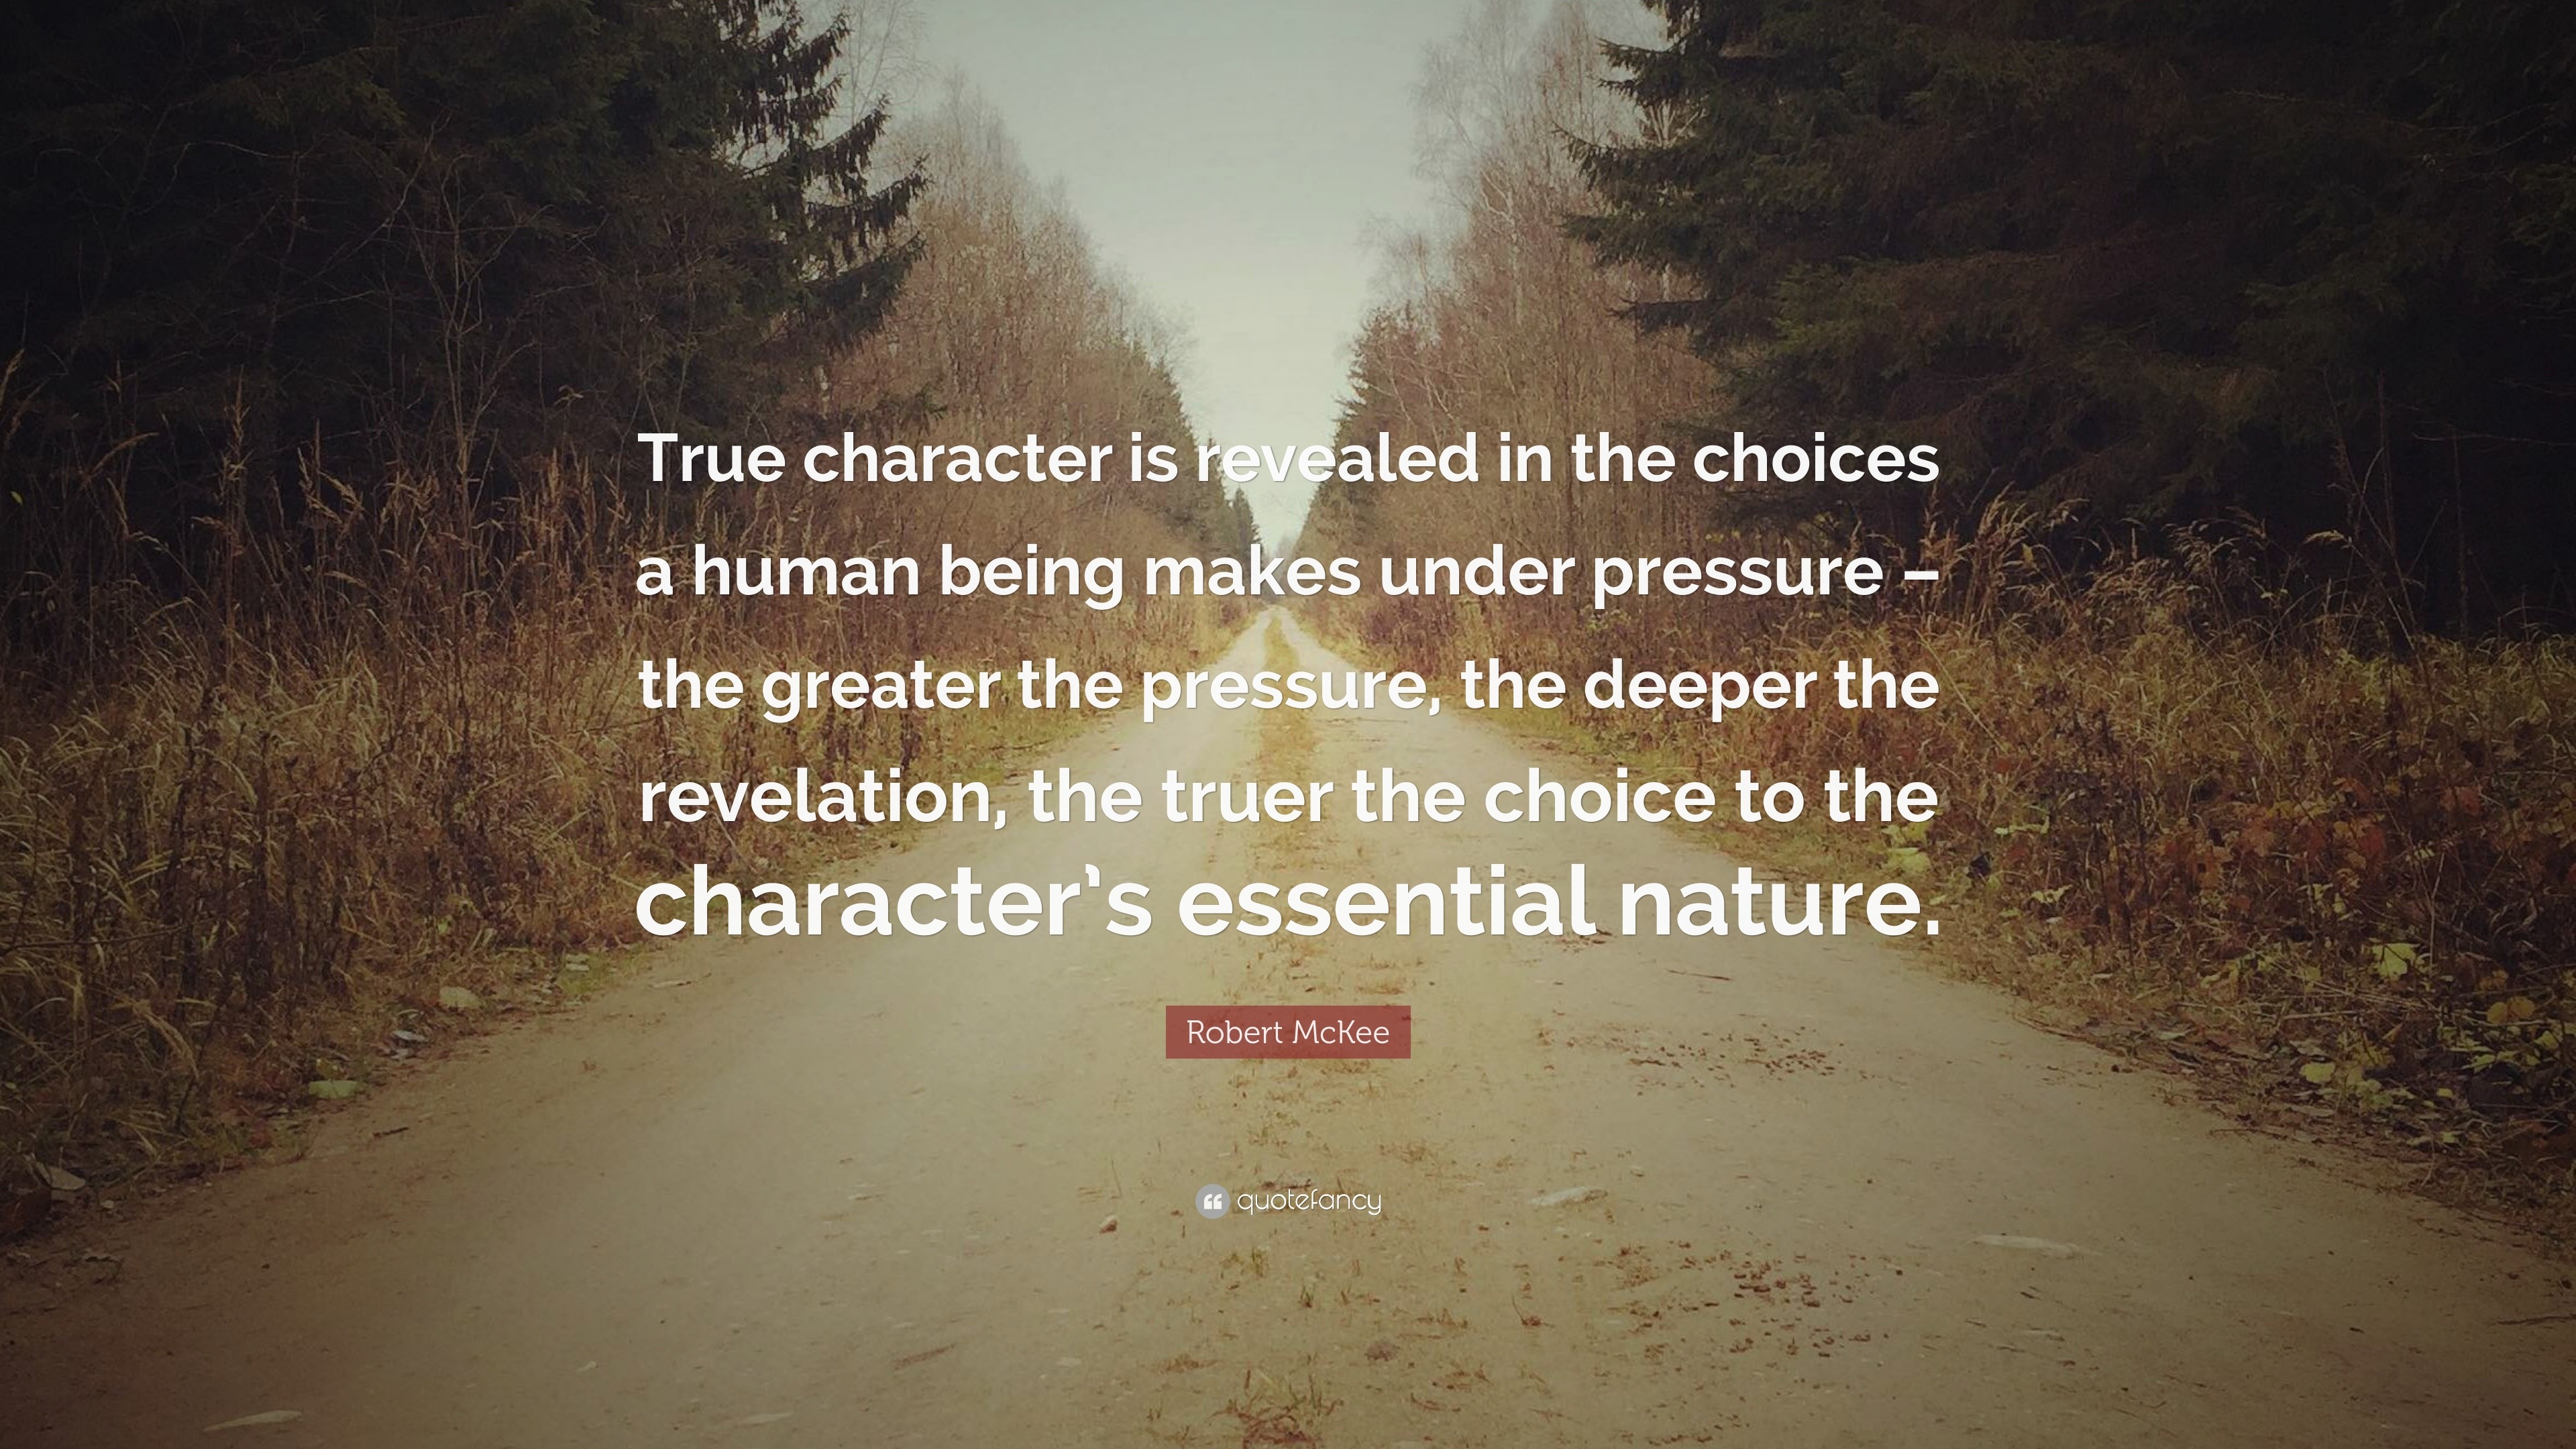 Robert McKee Quote: “True character is revealed in the choices a human